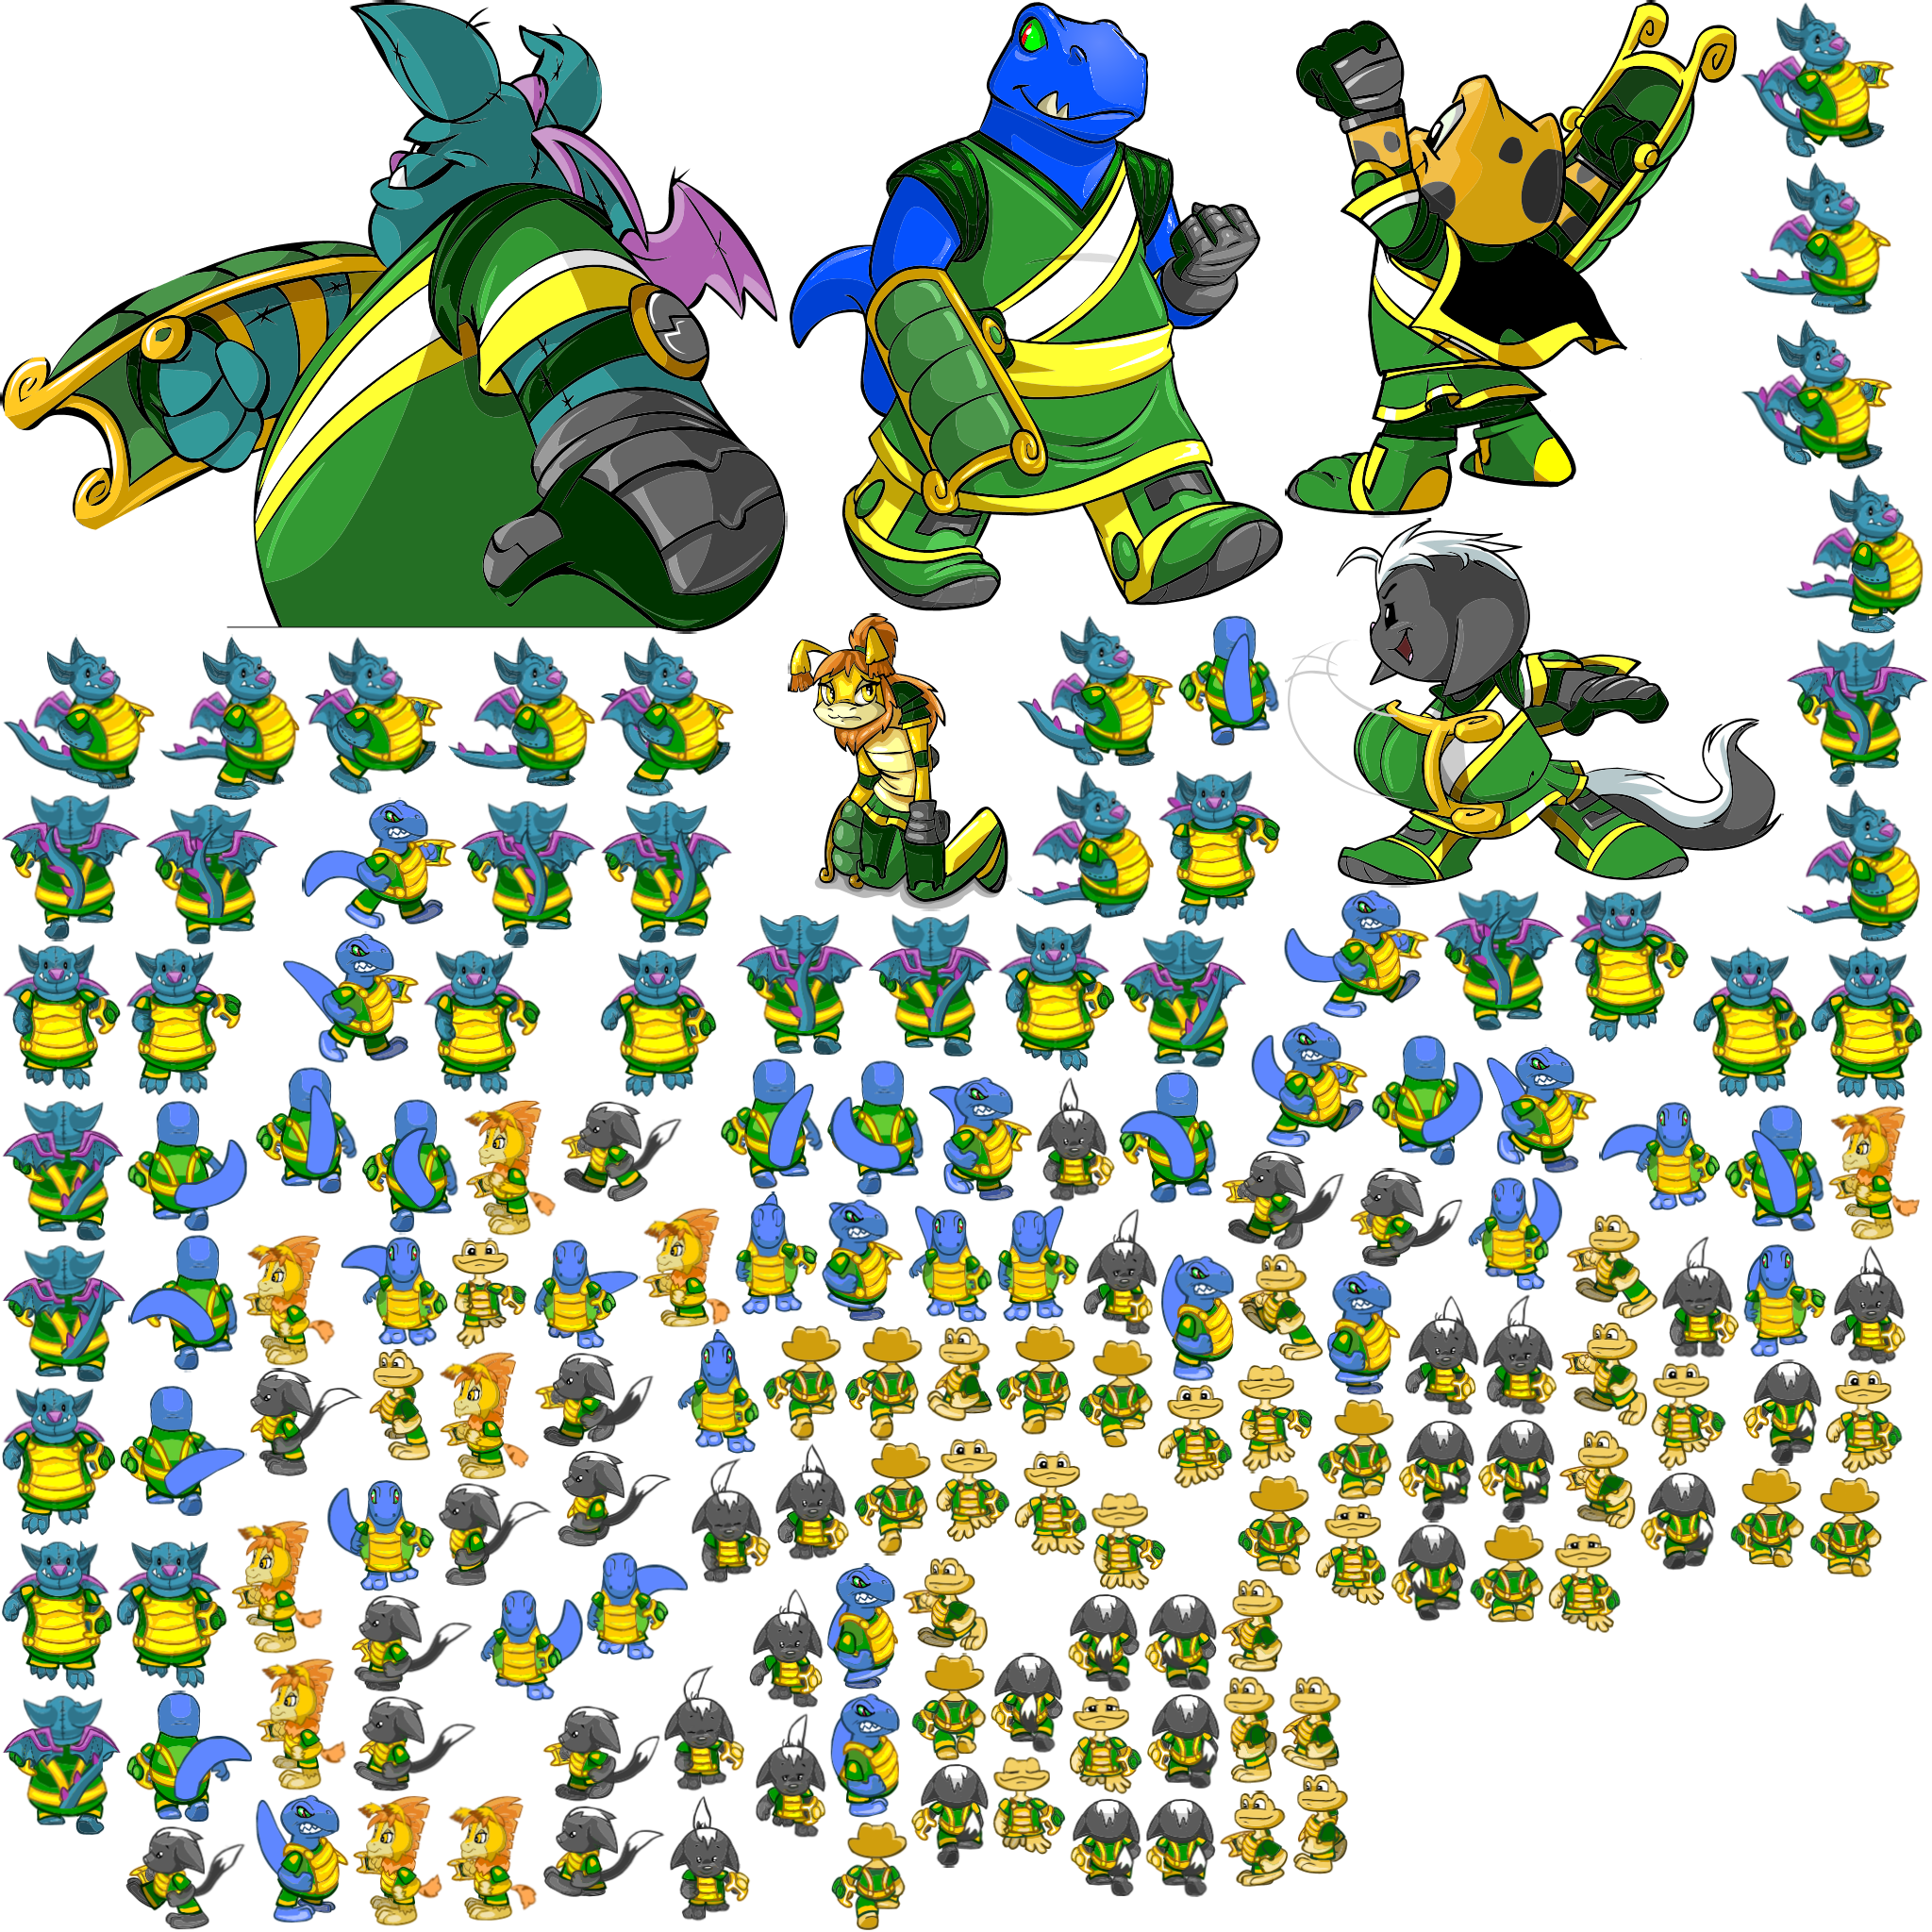 https://images.neopets.com/games/h5/yyb/Yooyuball_texture_66.png